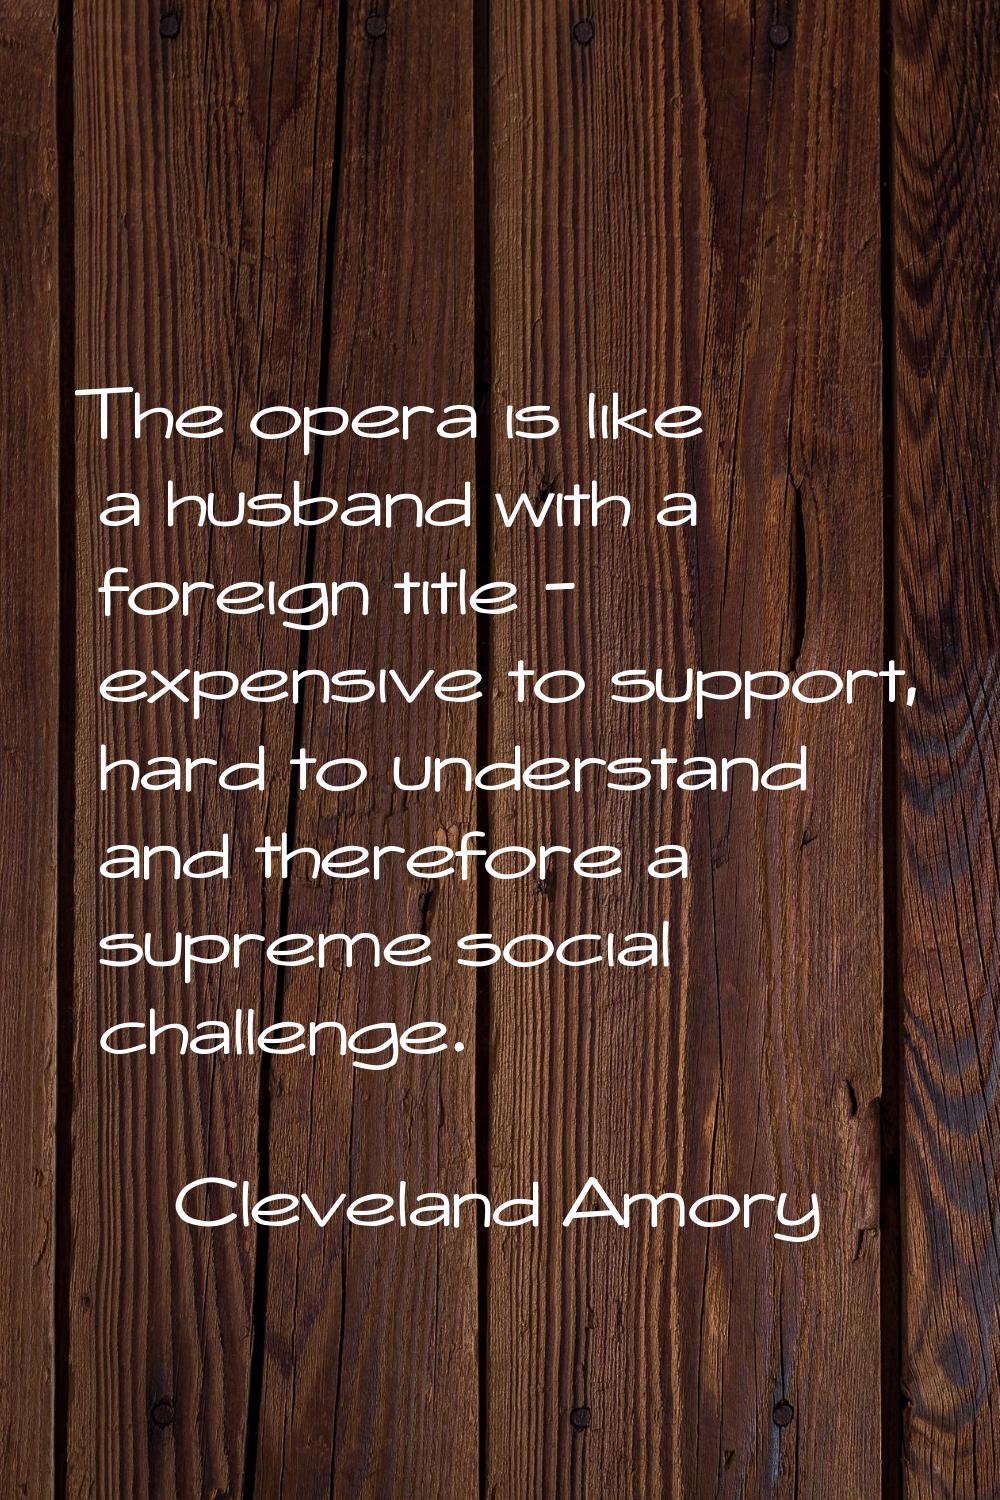 The opera is like a husband with a foreign title - expensive to support, hard to understand and the